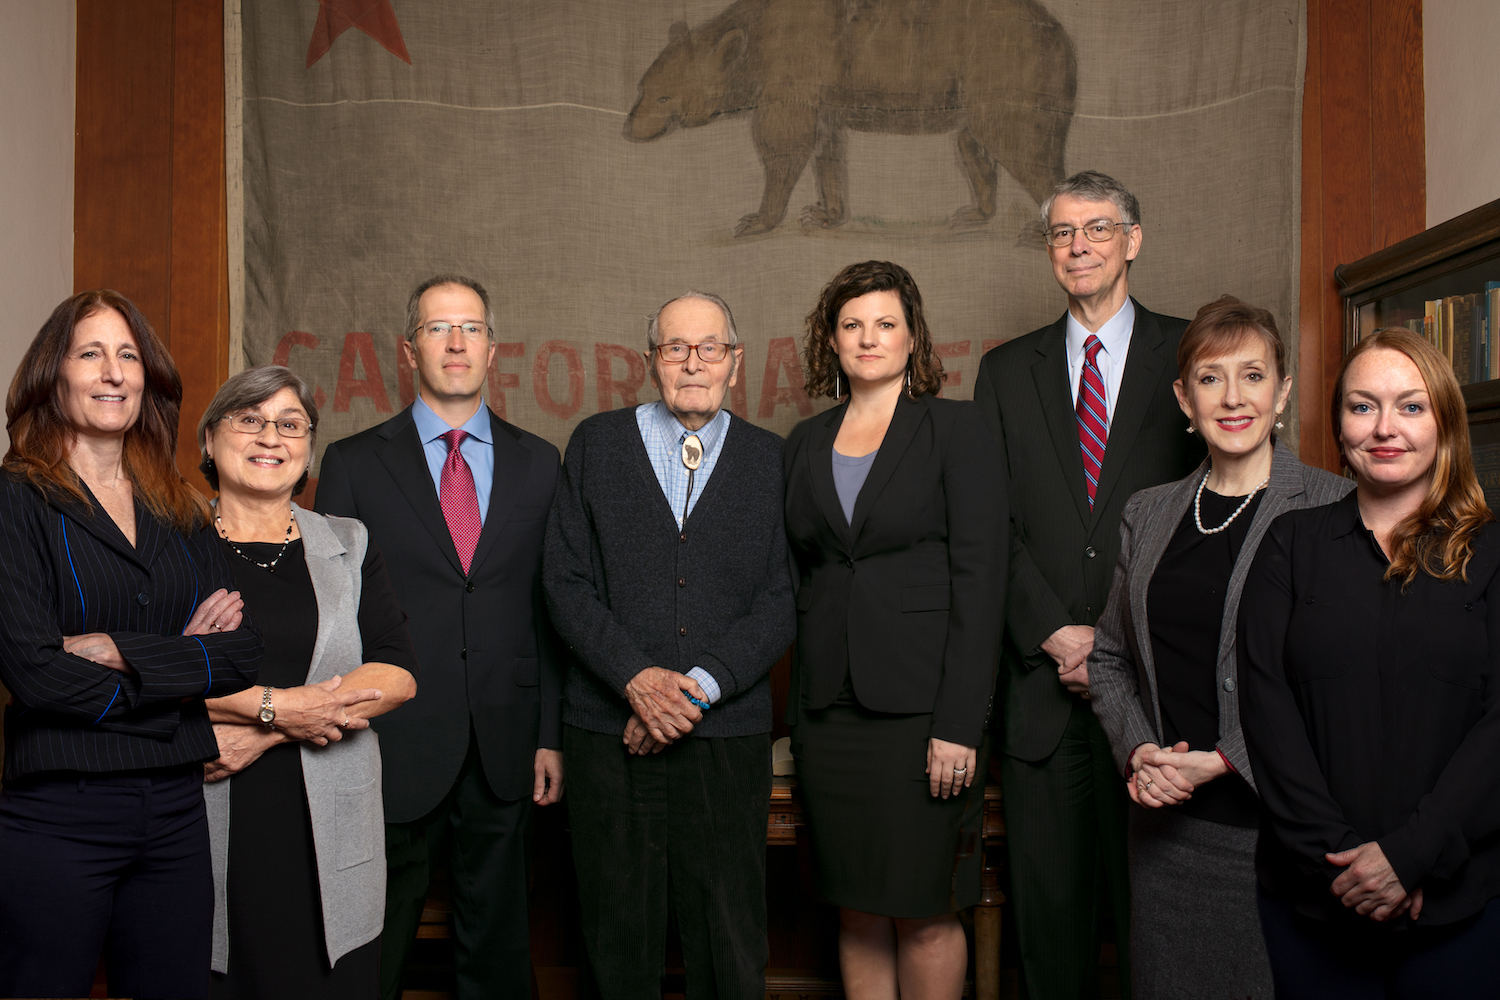 HVP-law-offices-group-photo